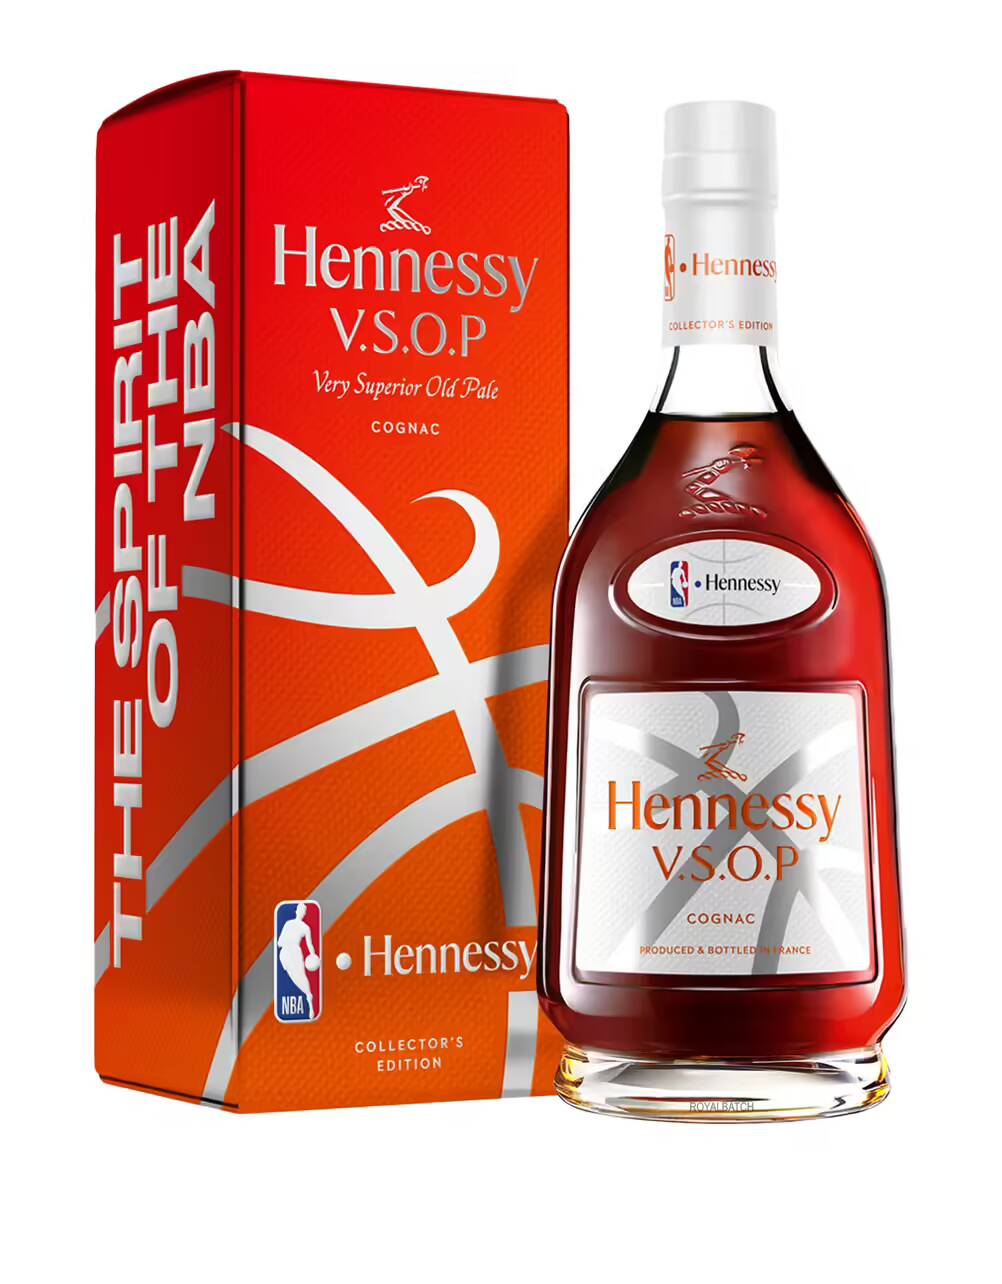 Hennessy VSOP Very Superior Old Pale NBA Collectors Edition Cognac